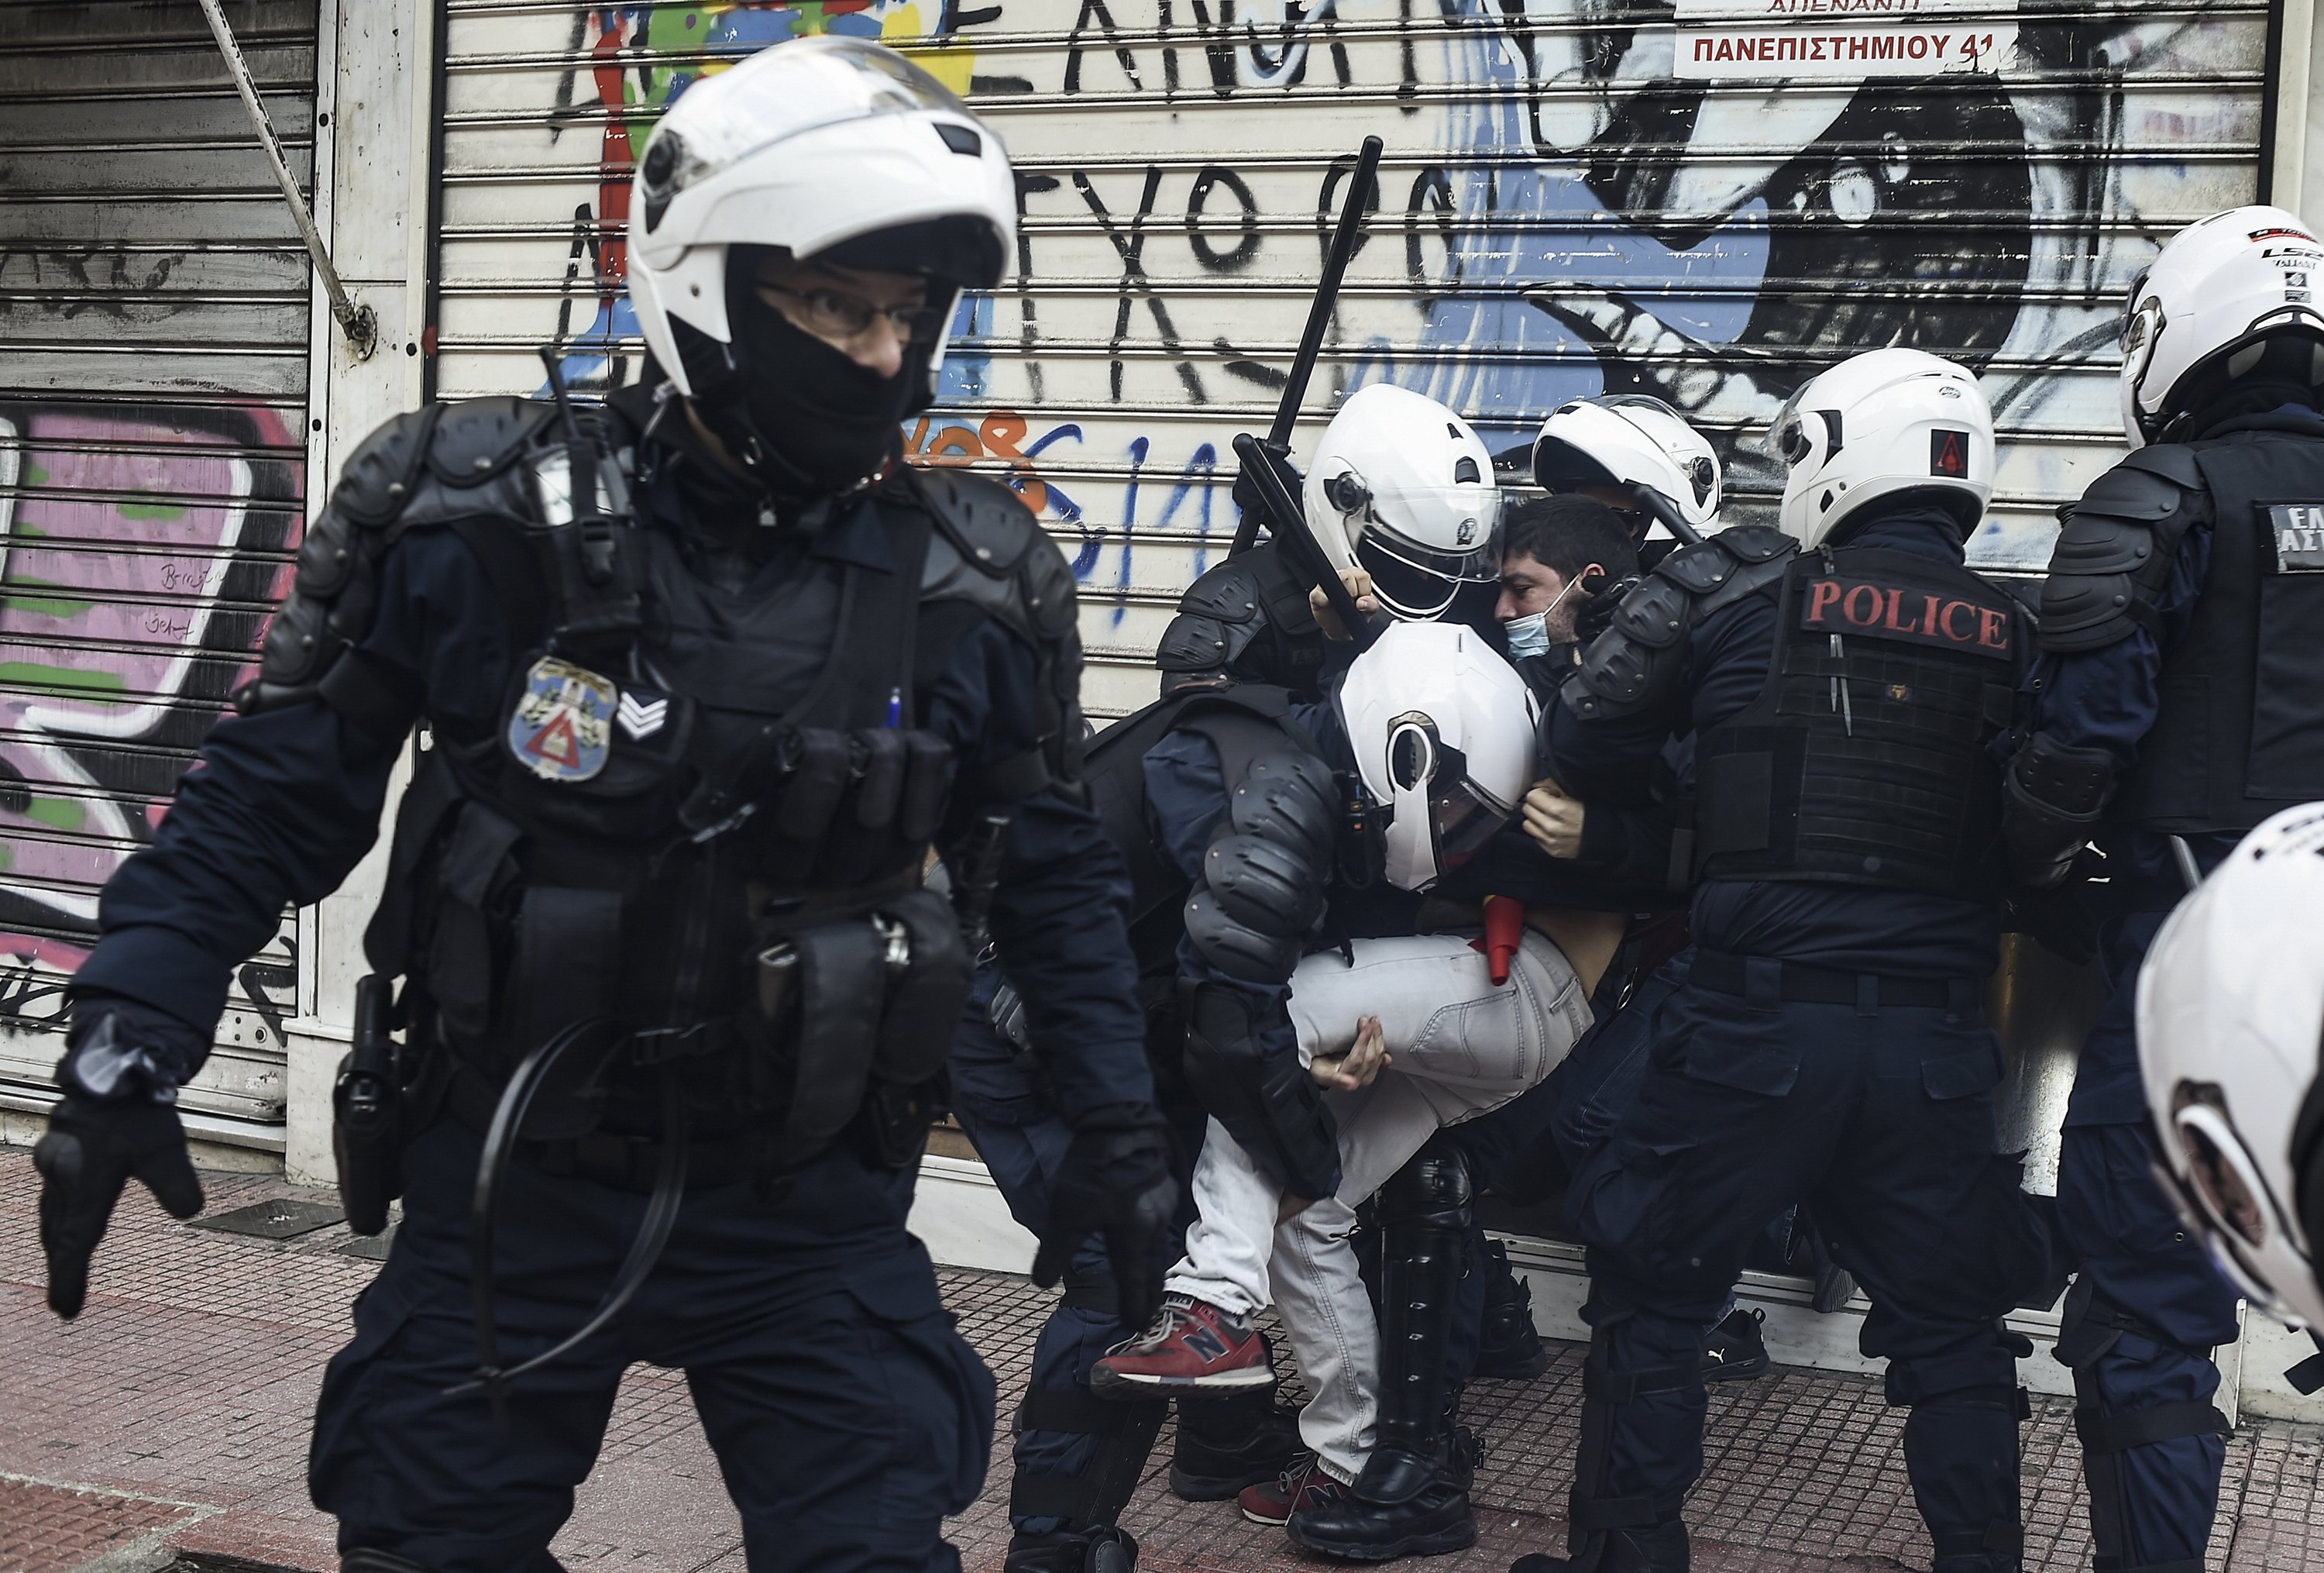 Police intervention to the 47th anniversary of Athens Polytechnic uprising demo in Athens